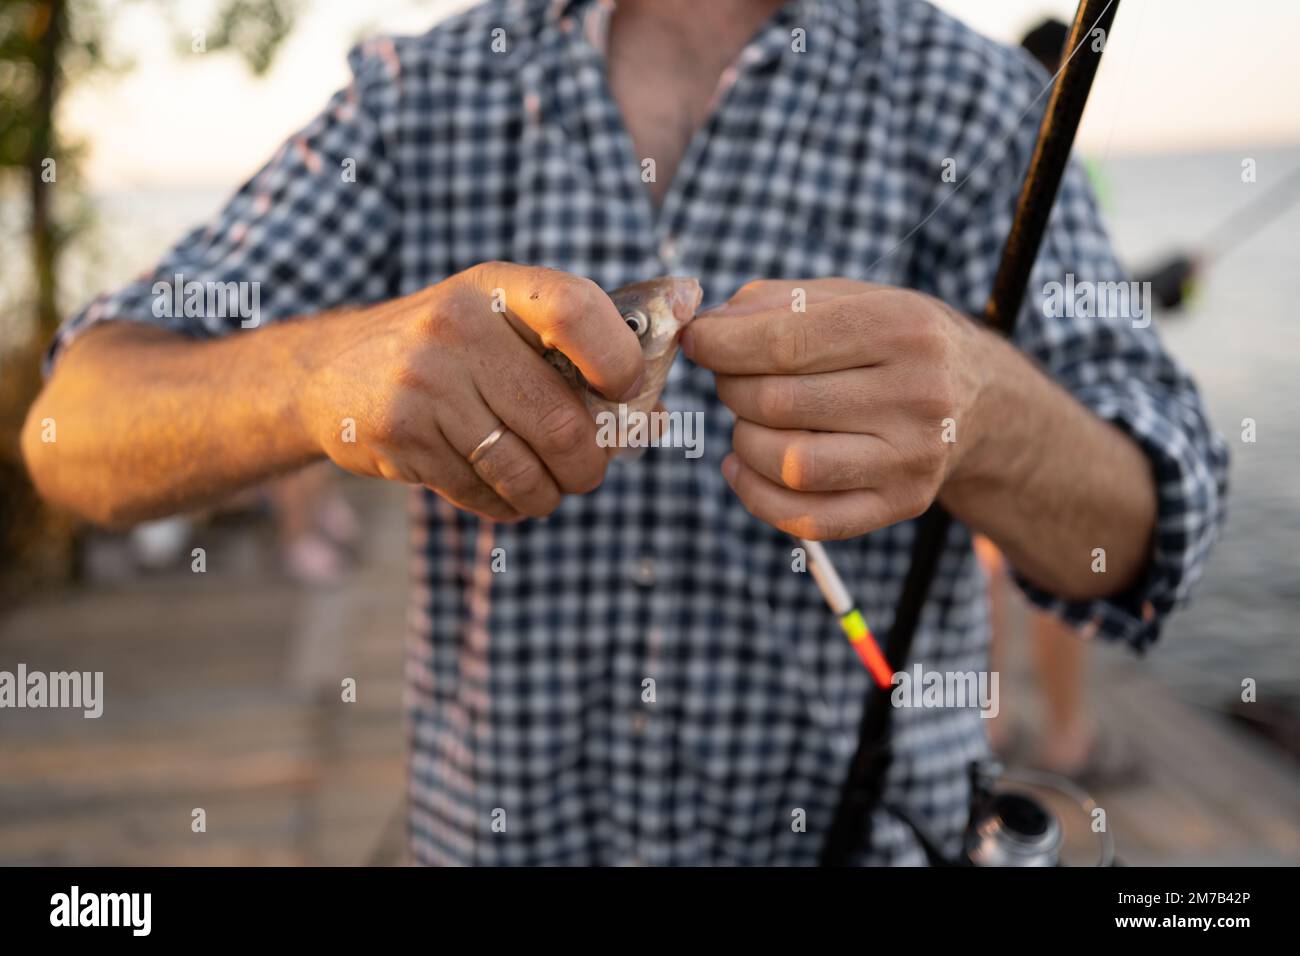 Close-up of a man holding a fishing rod and fish, sport fishing. Stock Photo